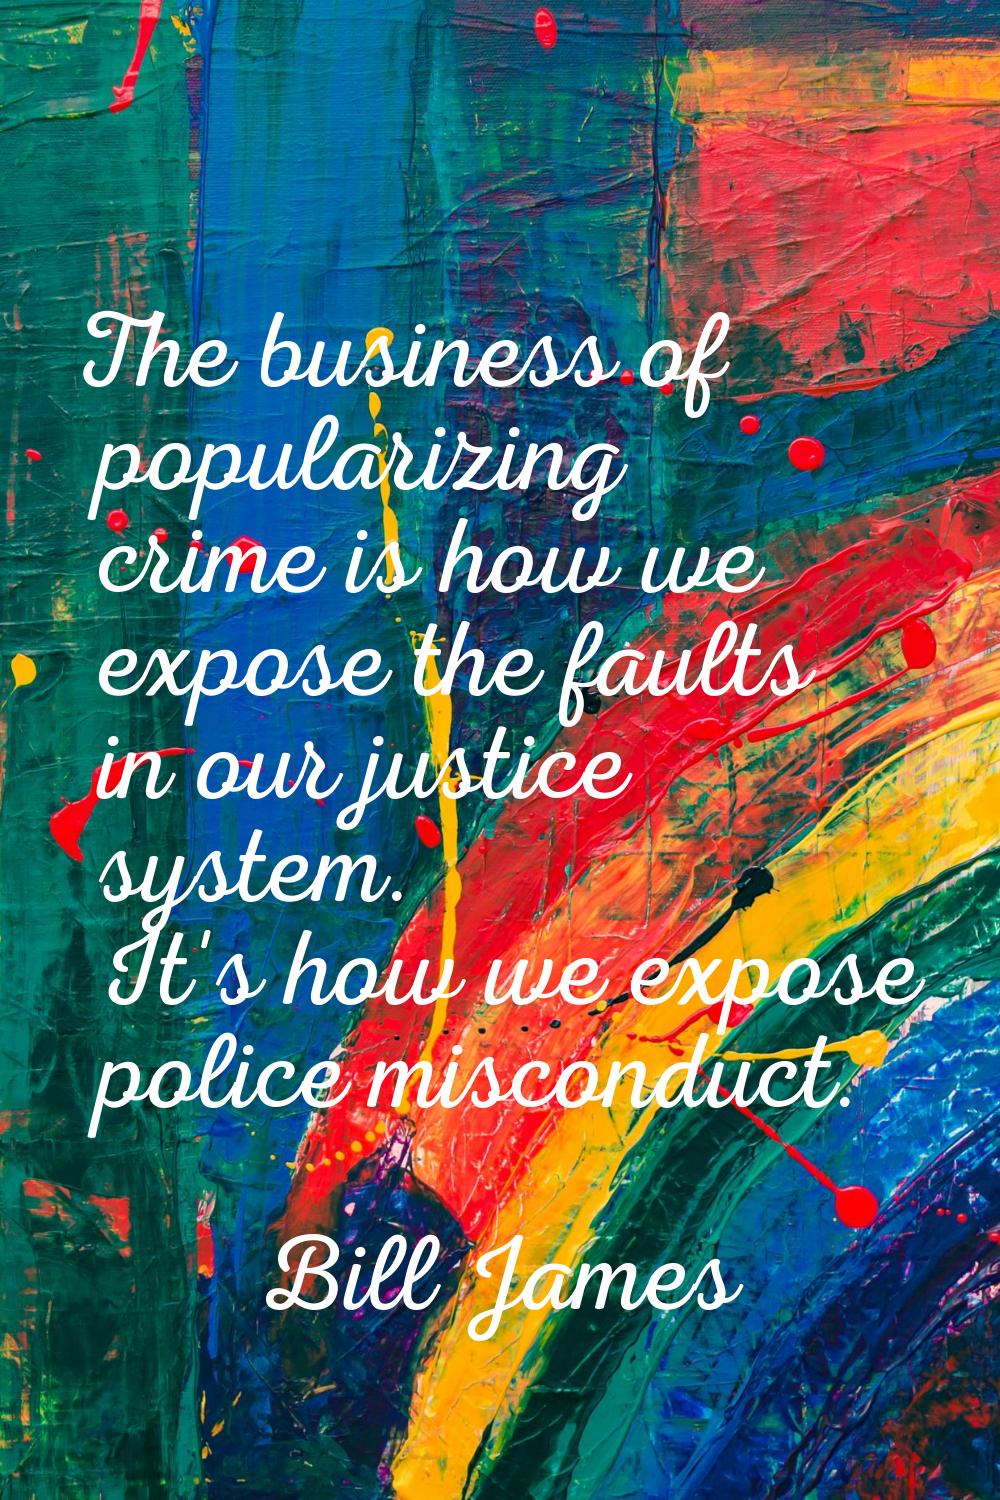 The business of popularizing crime is how we expose the faults in our justice system. It's how we e